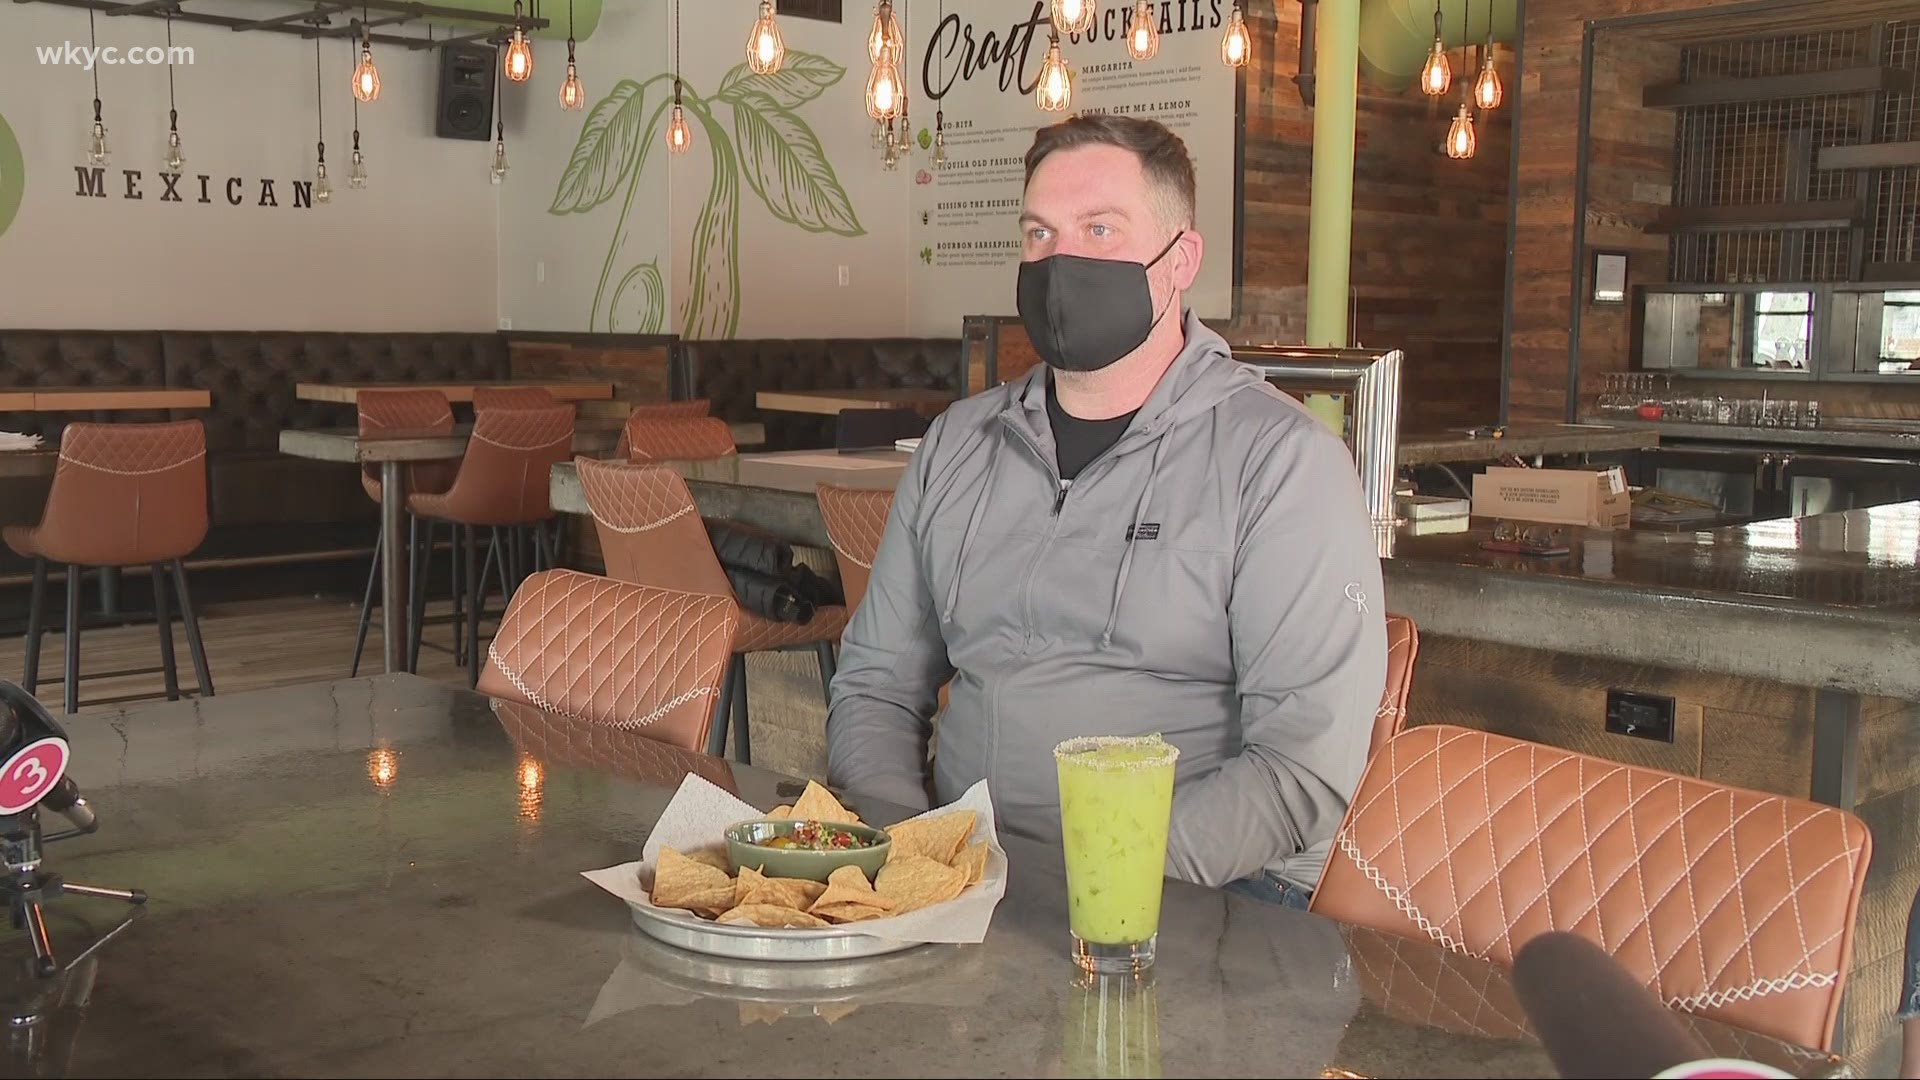 The grants can be used to pay for late bills and rent payments among other things. One Cleveland restaurant owner says it helps, but it may not be enough.